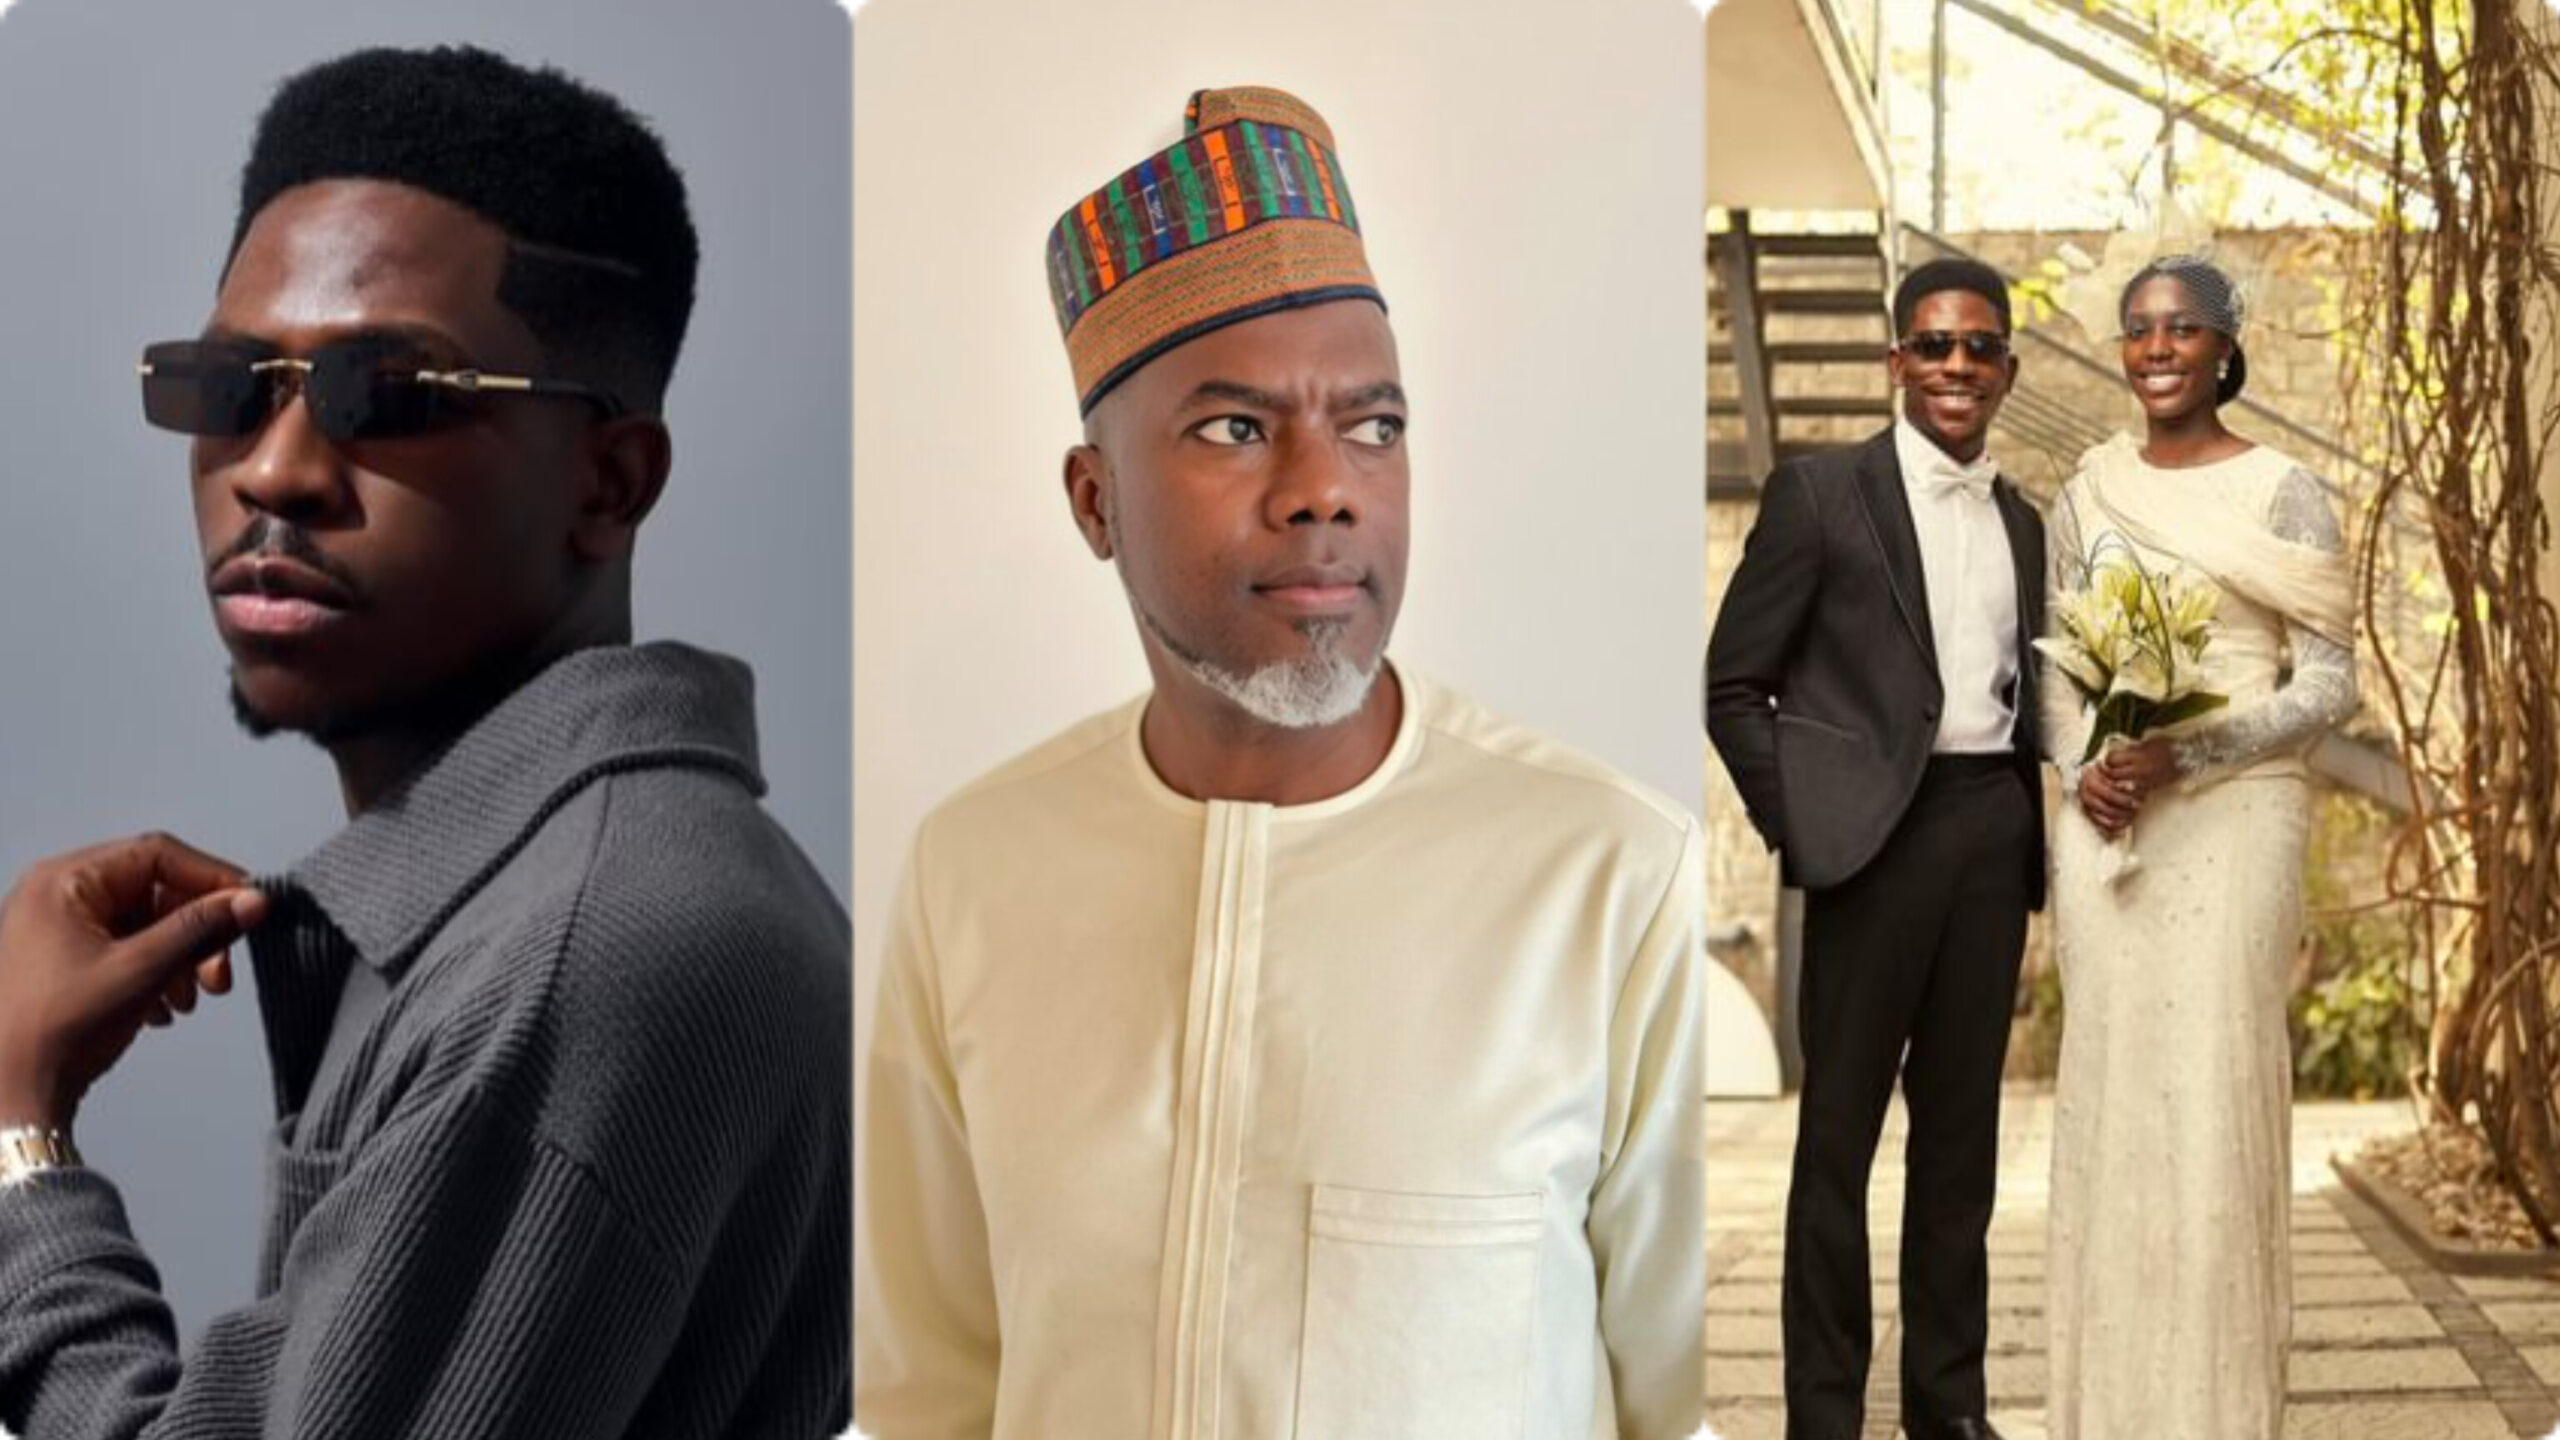 Moses Bliss Married A Ghanaian Because Nigerian Girls Can't Love Without Billing – Social Media Influencer, Reno Omokri